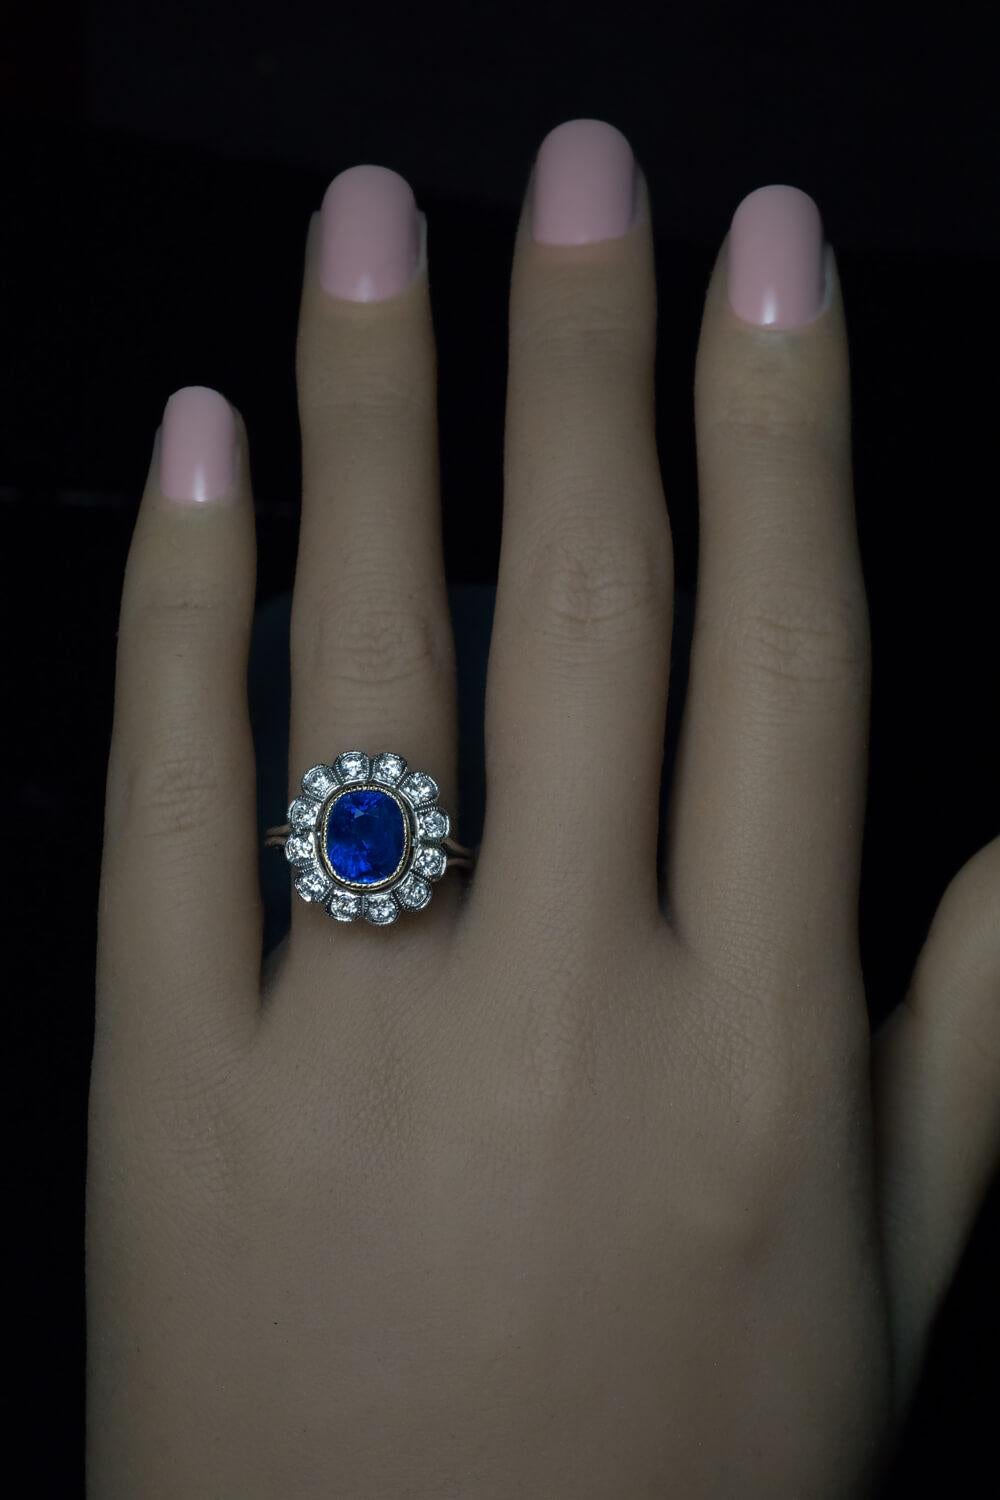 France, circa 1950s.

This vintage platinum engagement ring of a classical cluster design features a cushion shaped natural unheated Ceylon sapphire of royal blue color. The sapphire is set in 18K yellow gold bezel and surrounded by bright white